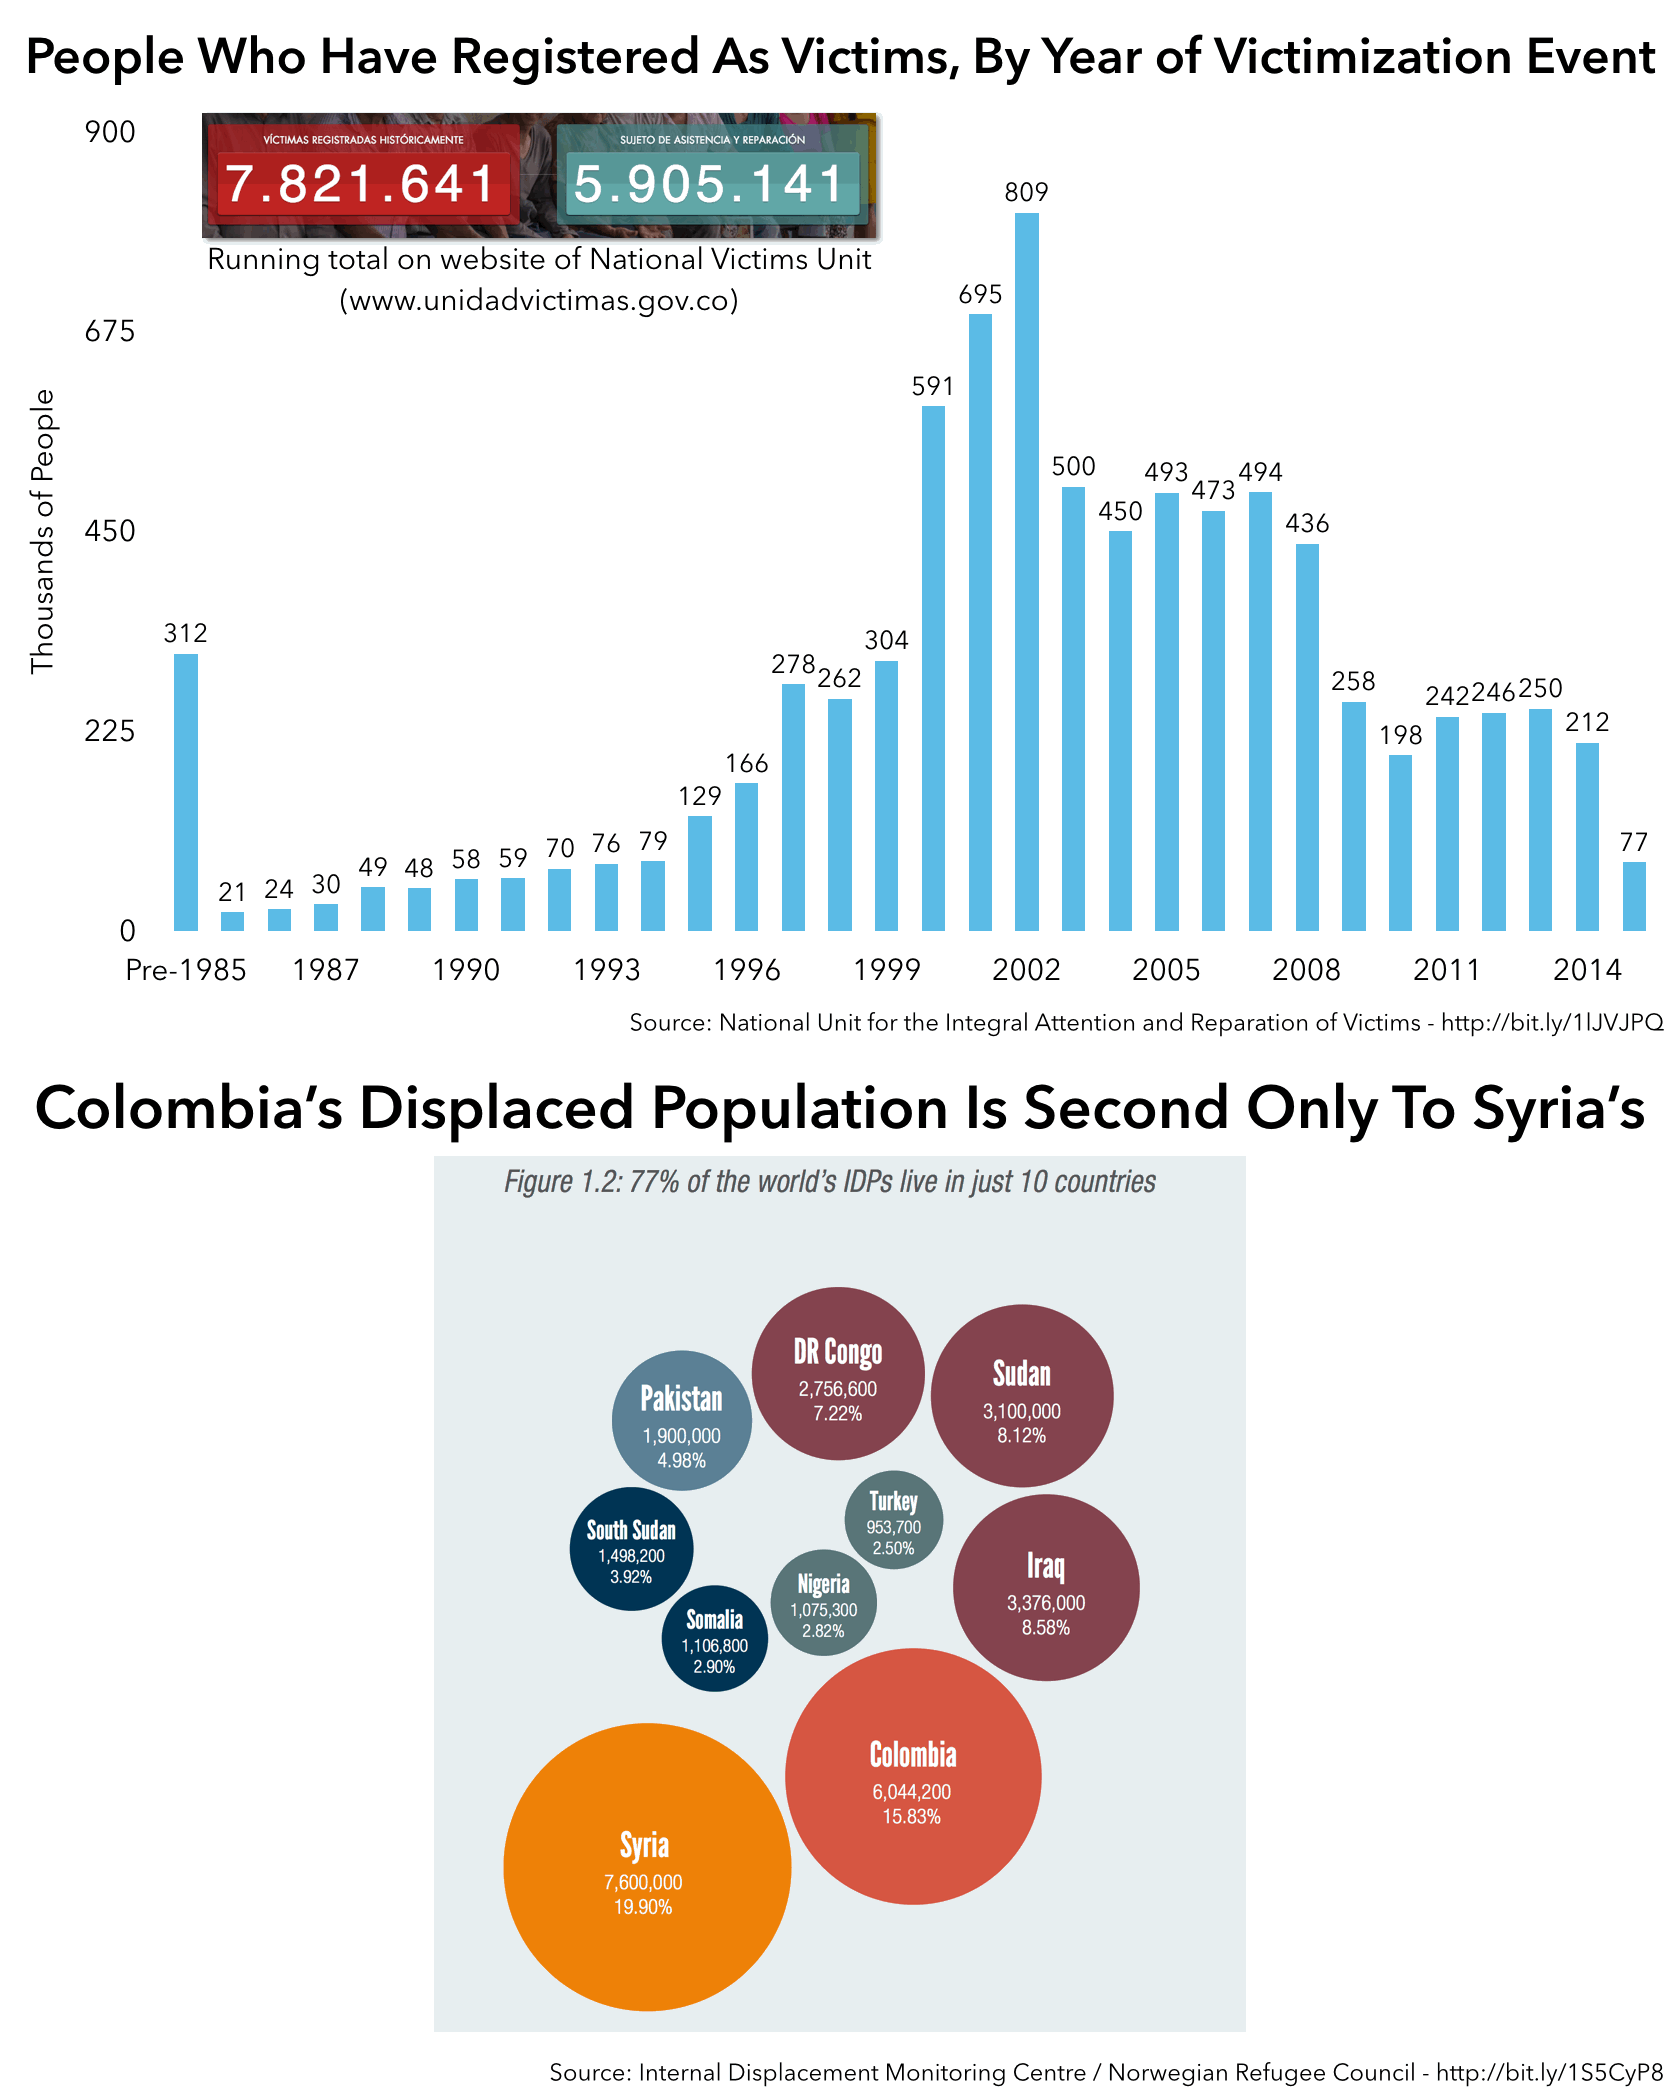 Chart of victims by year of victimization, followed by a graphic illusrating Colombia's status as the number-two population of internally displaced people